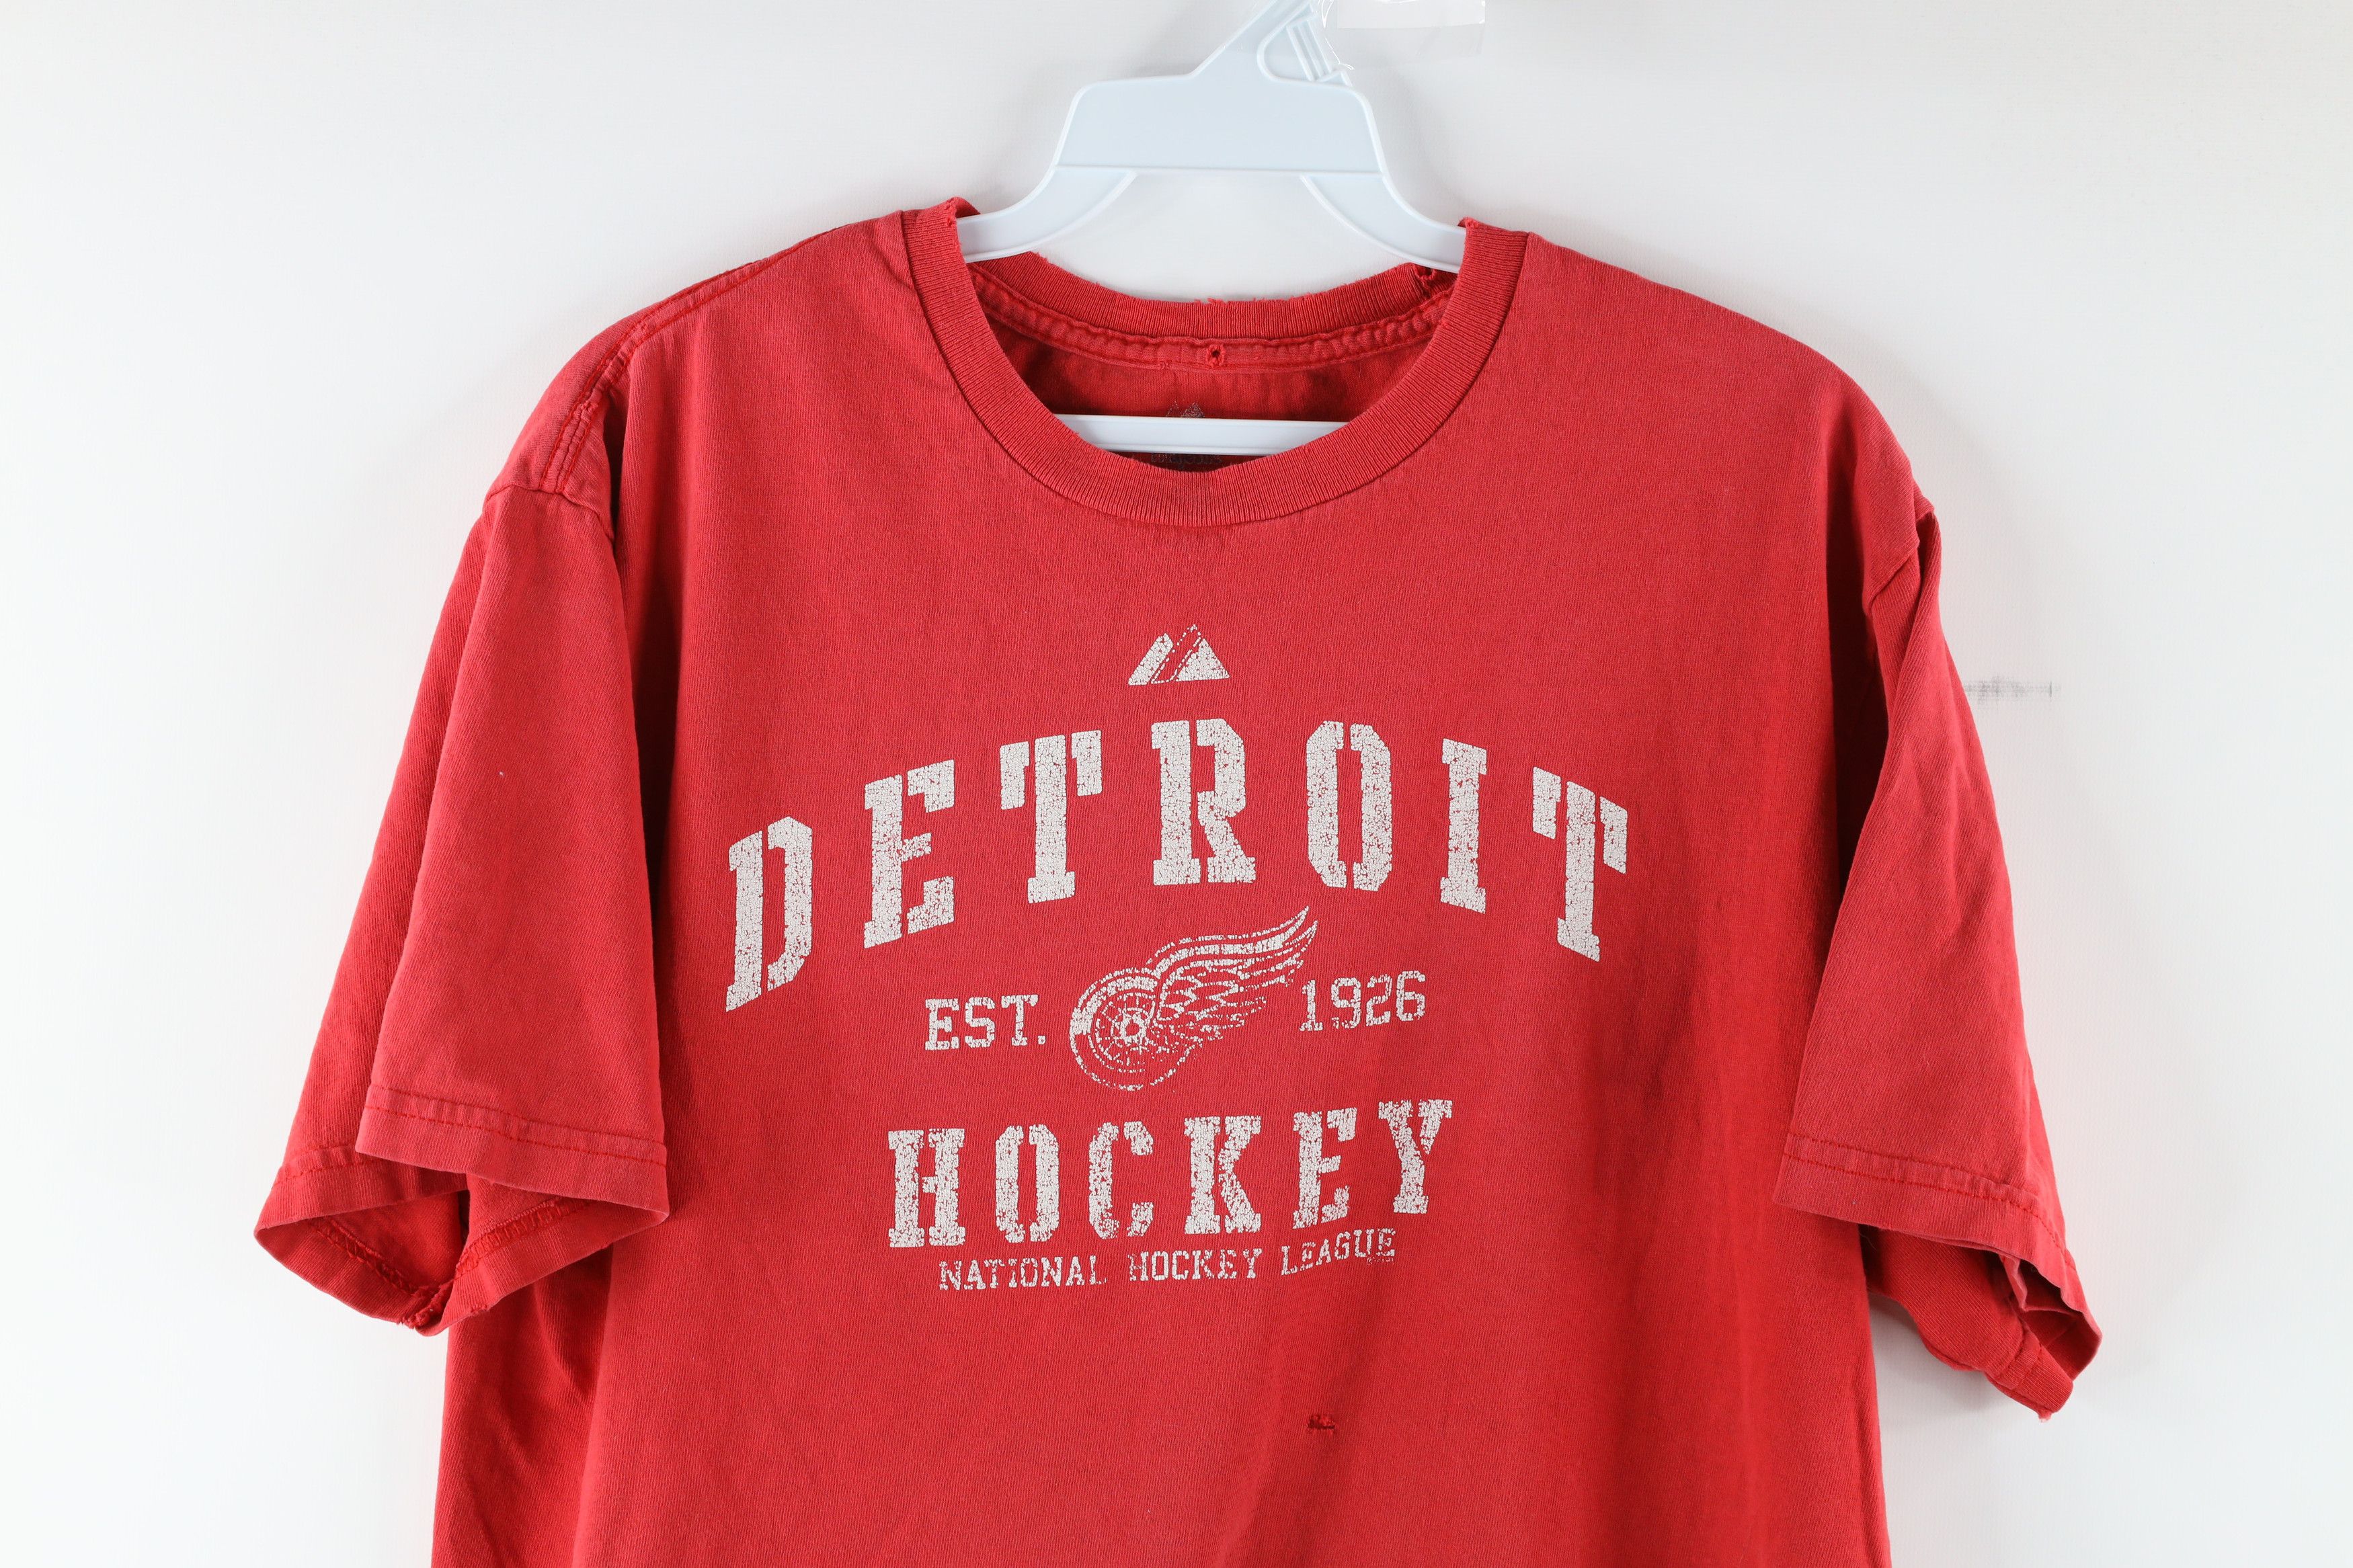 Vintage Vintage Majestic Thrashed Detroit Red Wings Hockey T-Shirt Size US M / EU 48-50 / 2 - 2 Preview